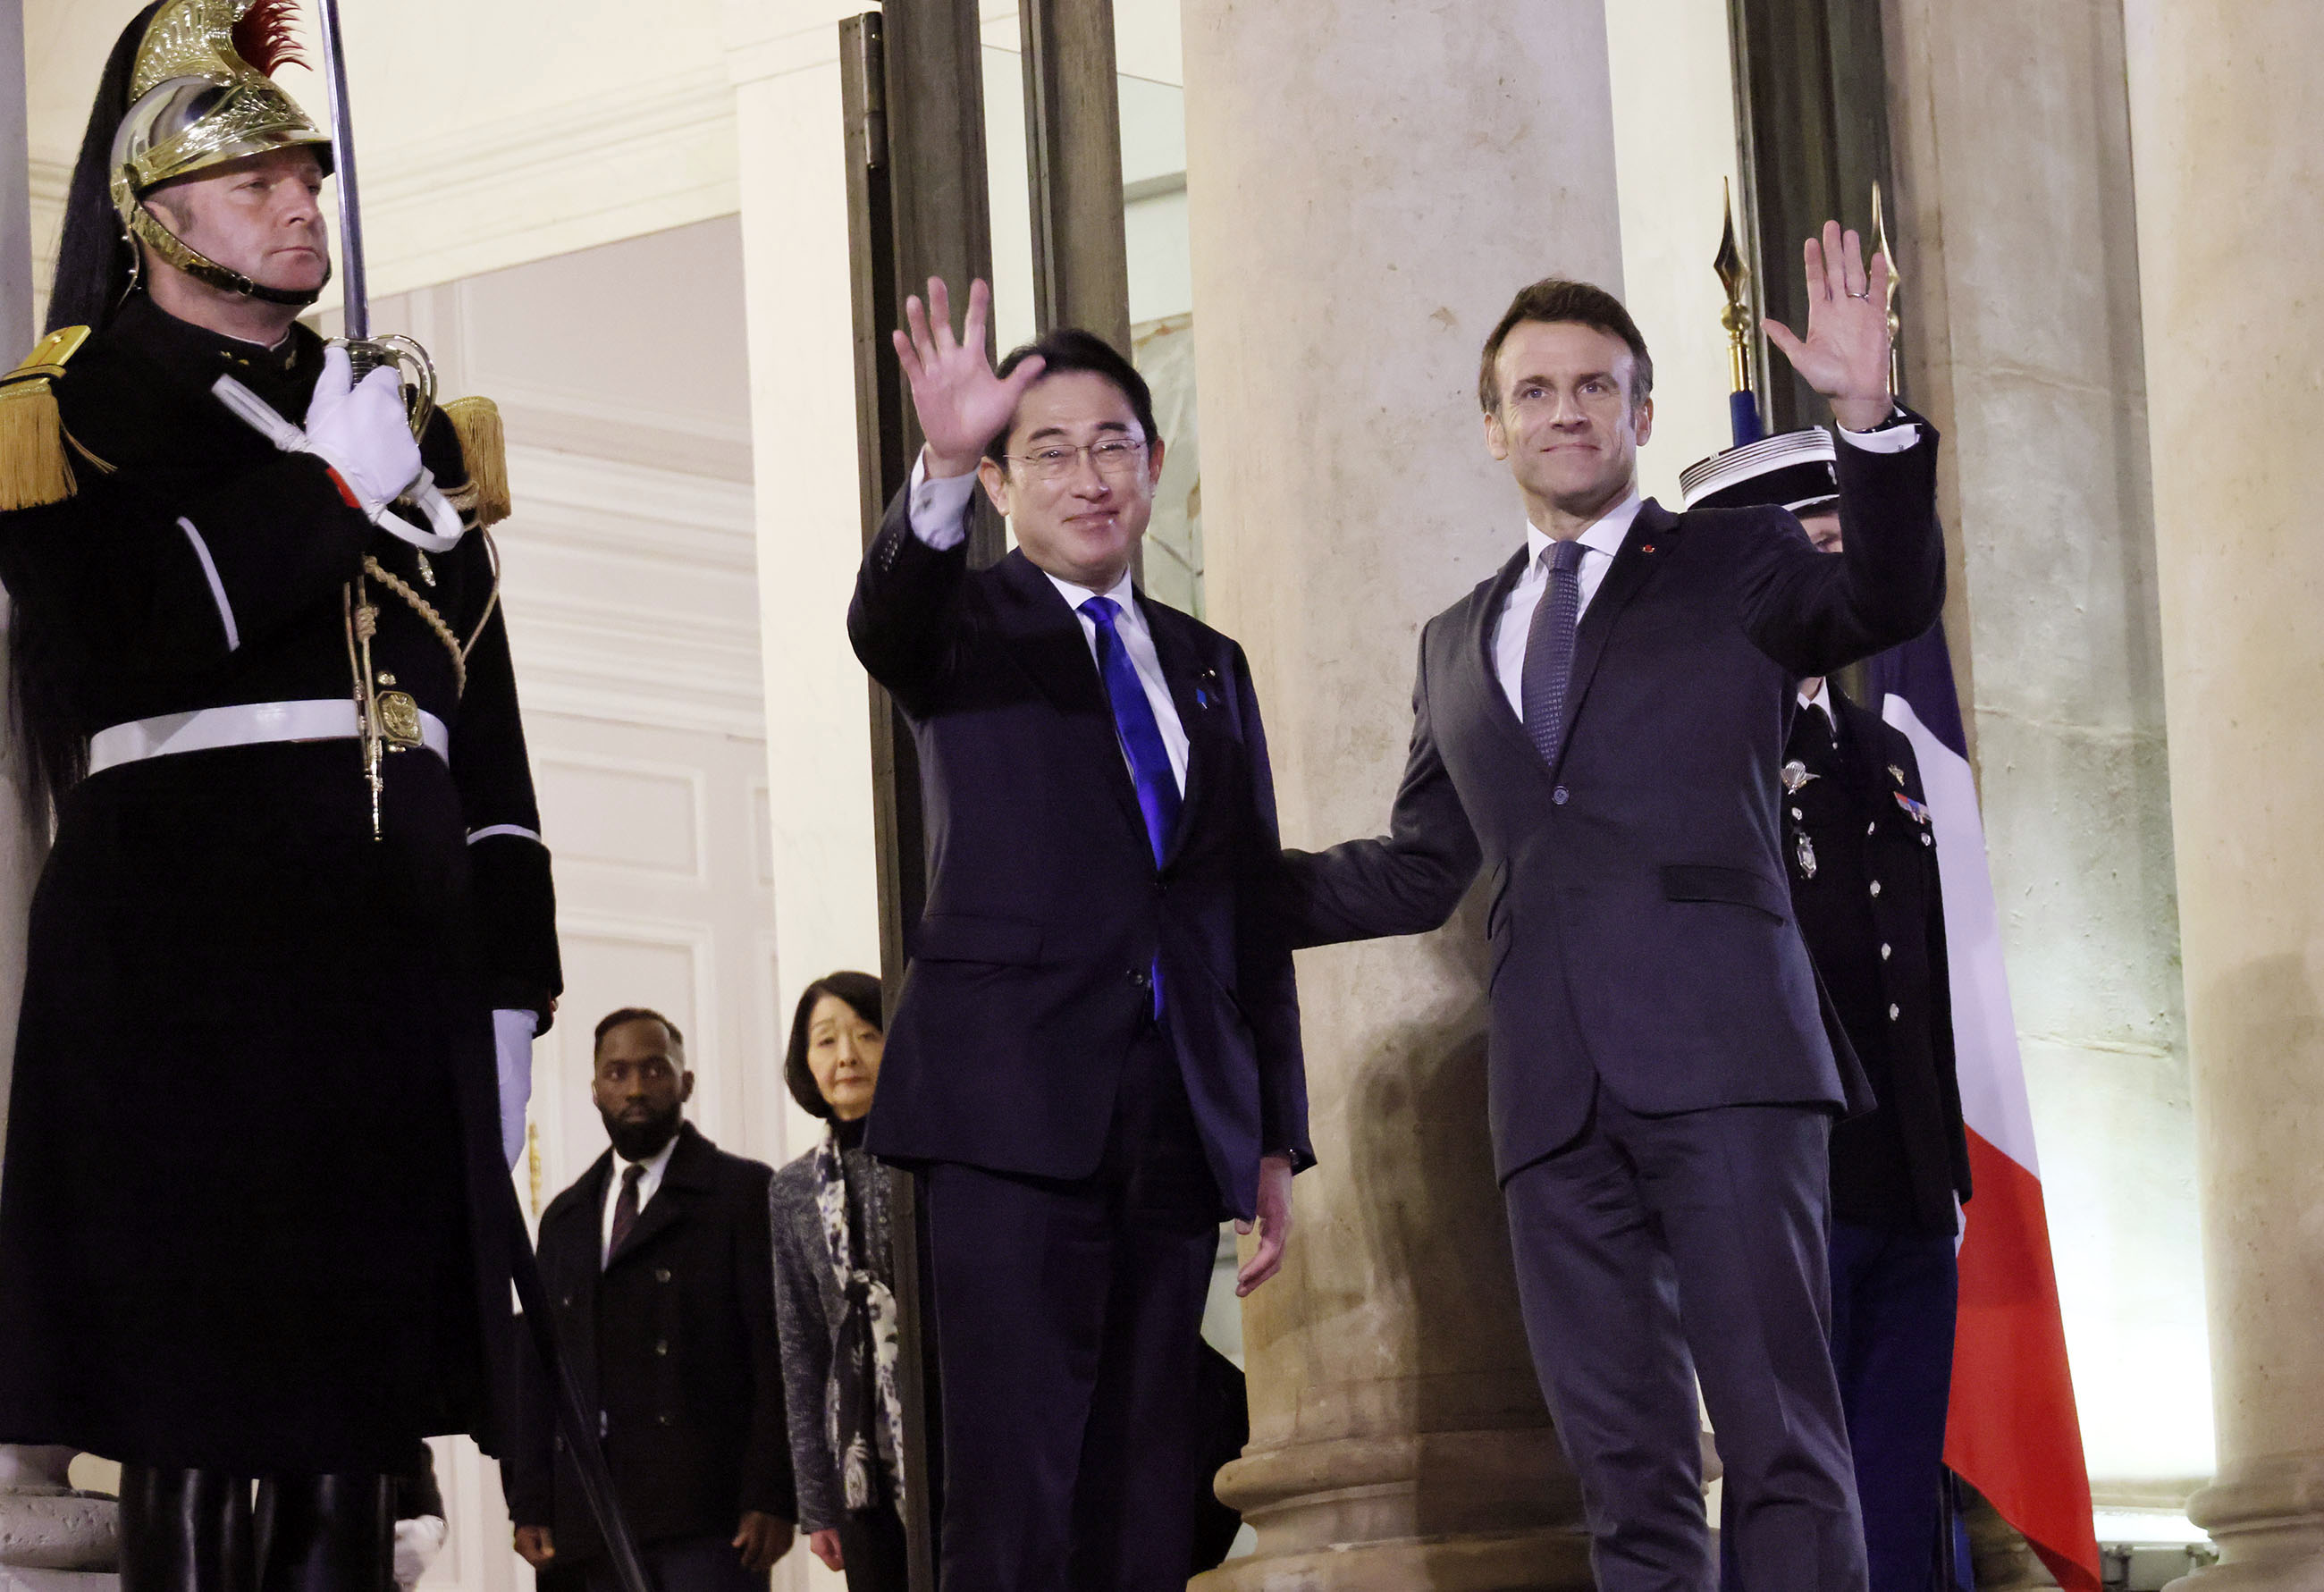 Prime Minister Kishida receiving greetings from President Marcron of France (3)